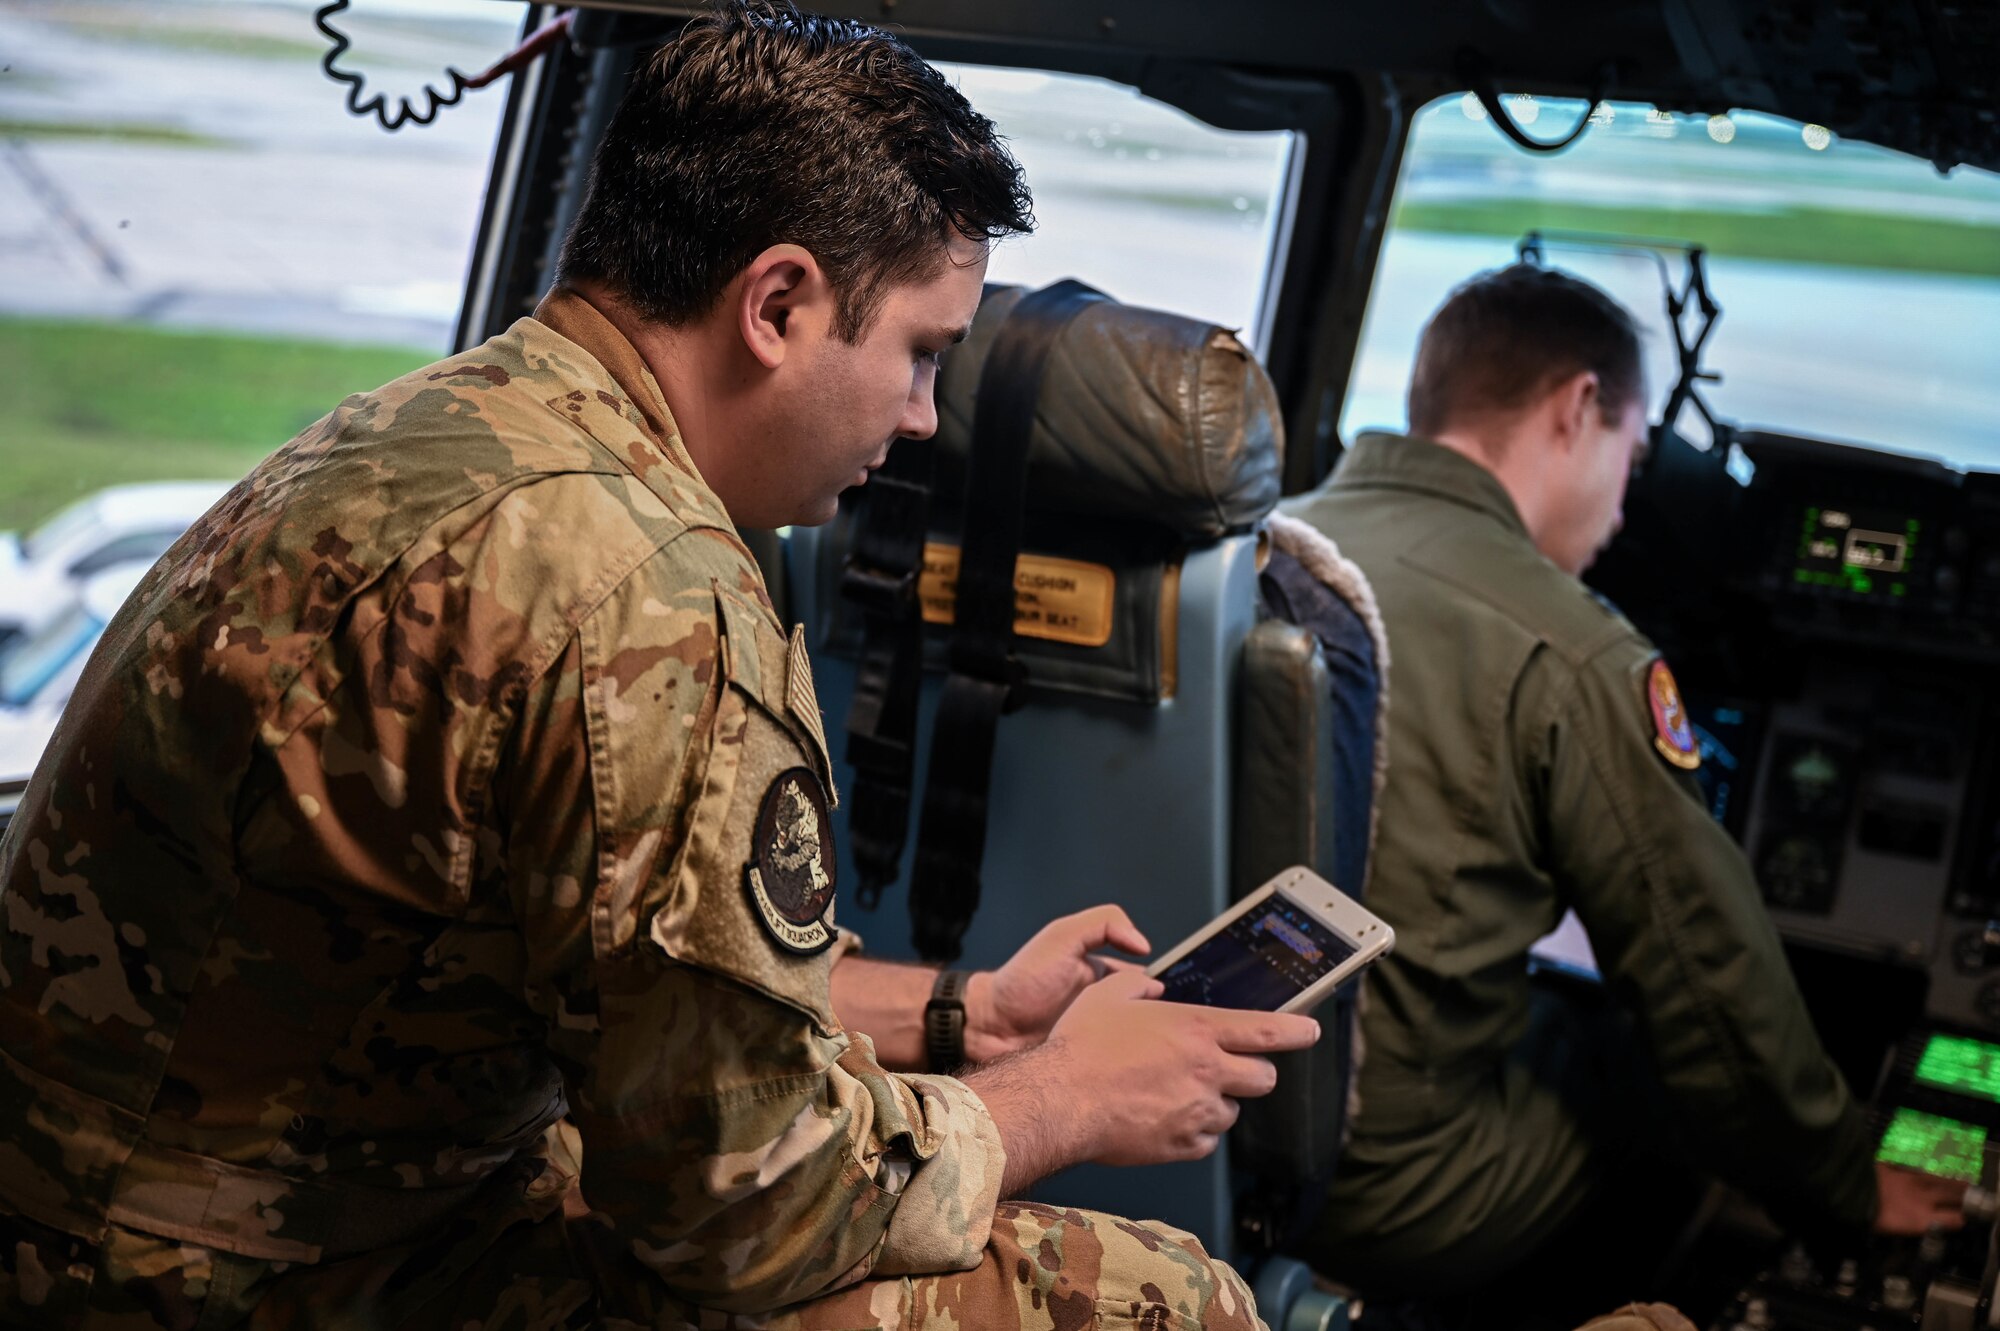 1st Lt. Michael Knab, 535th Airlift Squadron C-17A Globemaster III co-pilot, reviews flight plans while Capt. Alec Nelson, 535th AS C-17 aircraft commander, performs preflight checks at Andersen Air Force Base, Guam, Nov. 14, 2021. The Joint Base Pearl Harbor-Hickam, Hawaii, aircrew participated in a three-ship formation and performed simulated high-altitude drops with Royal Australian Air Force C-17s over the West Pacific. (U.S. Air Force photo by Staff Sgt. Alan Ricker)